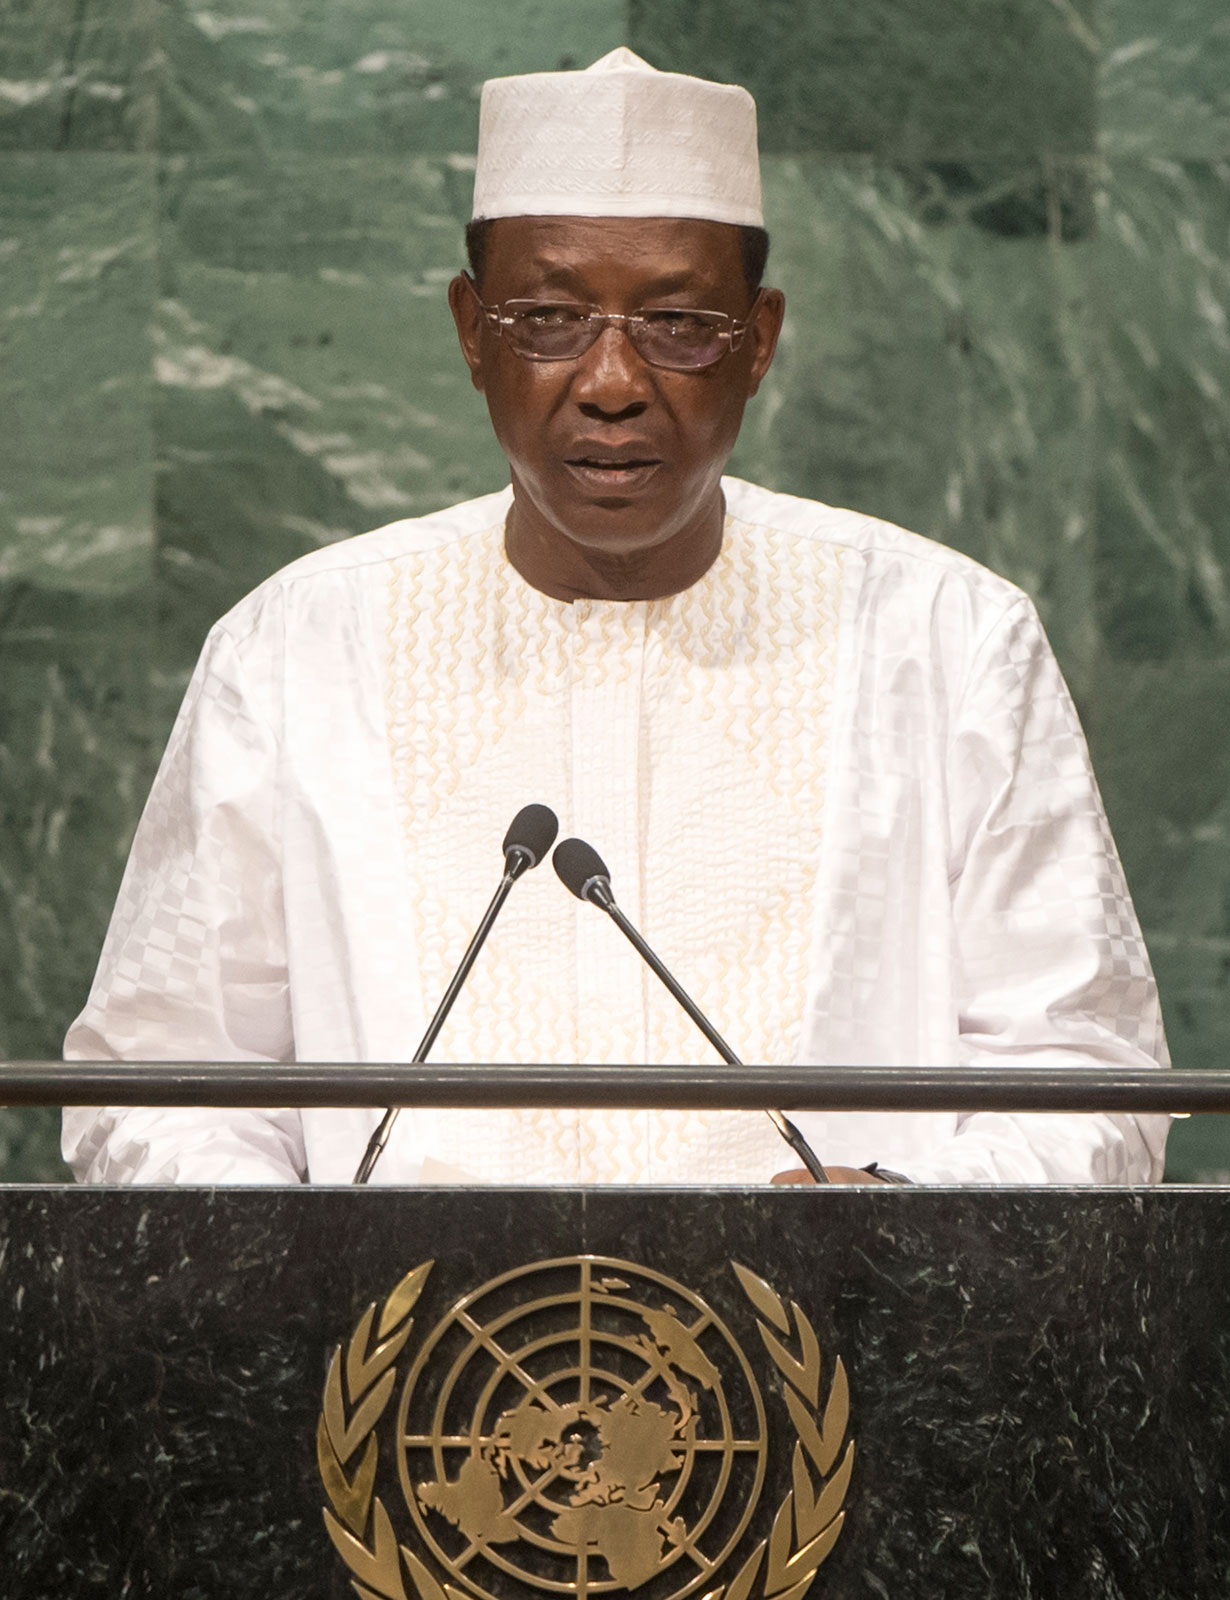 National hero of Chad - Idriss Déby 